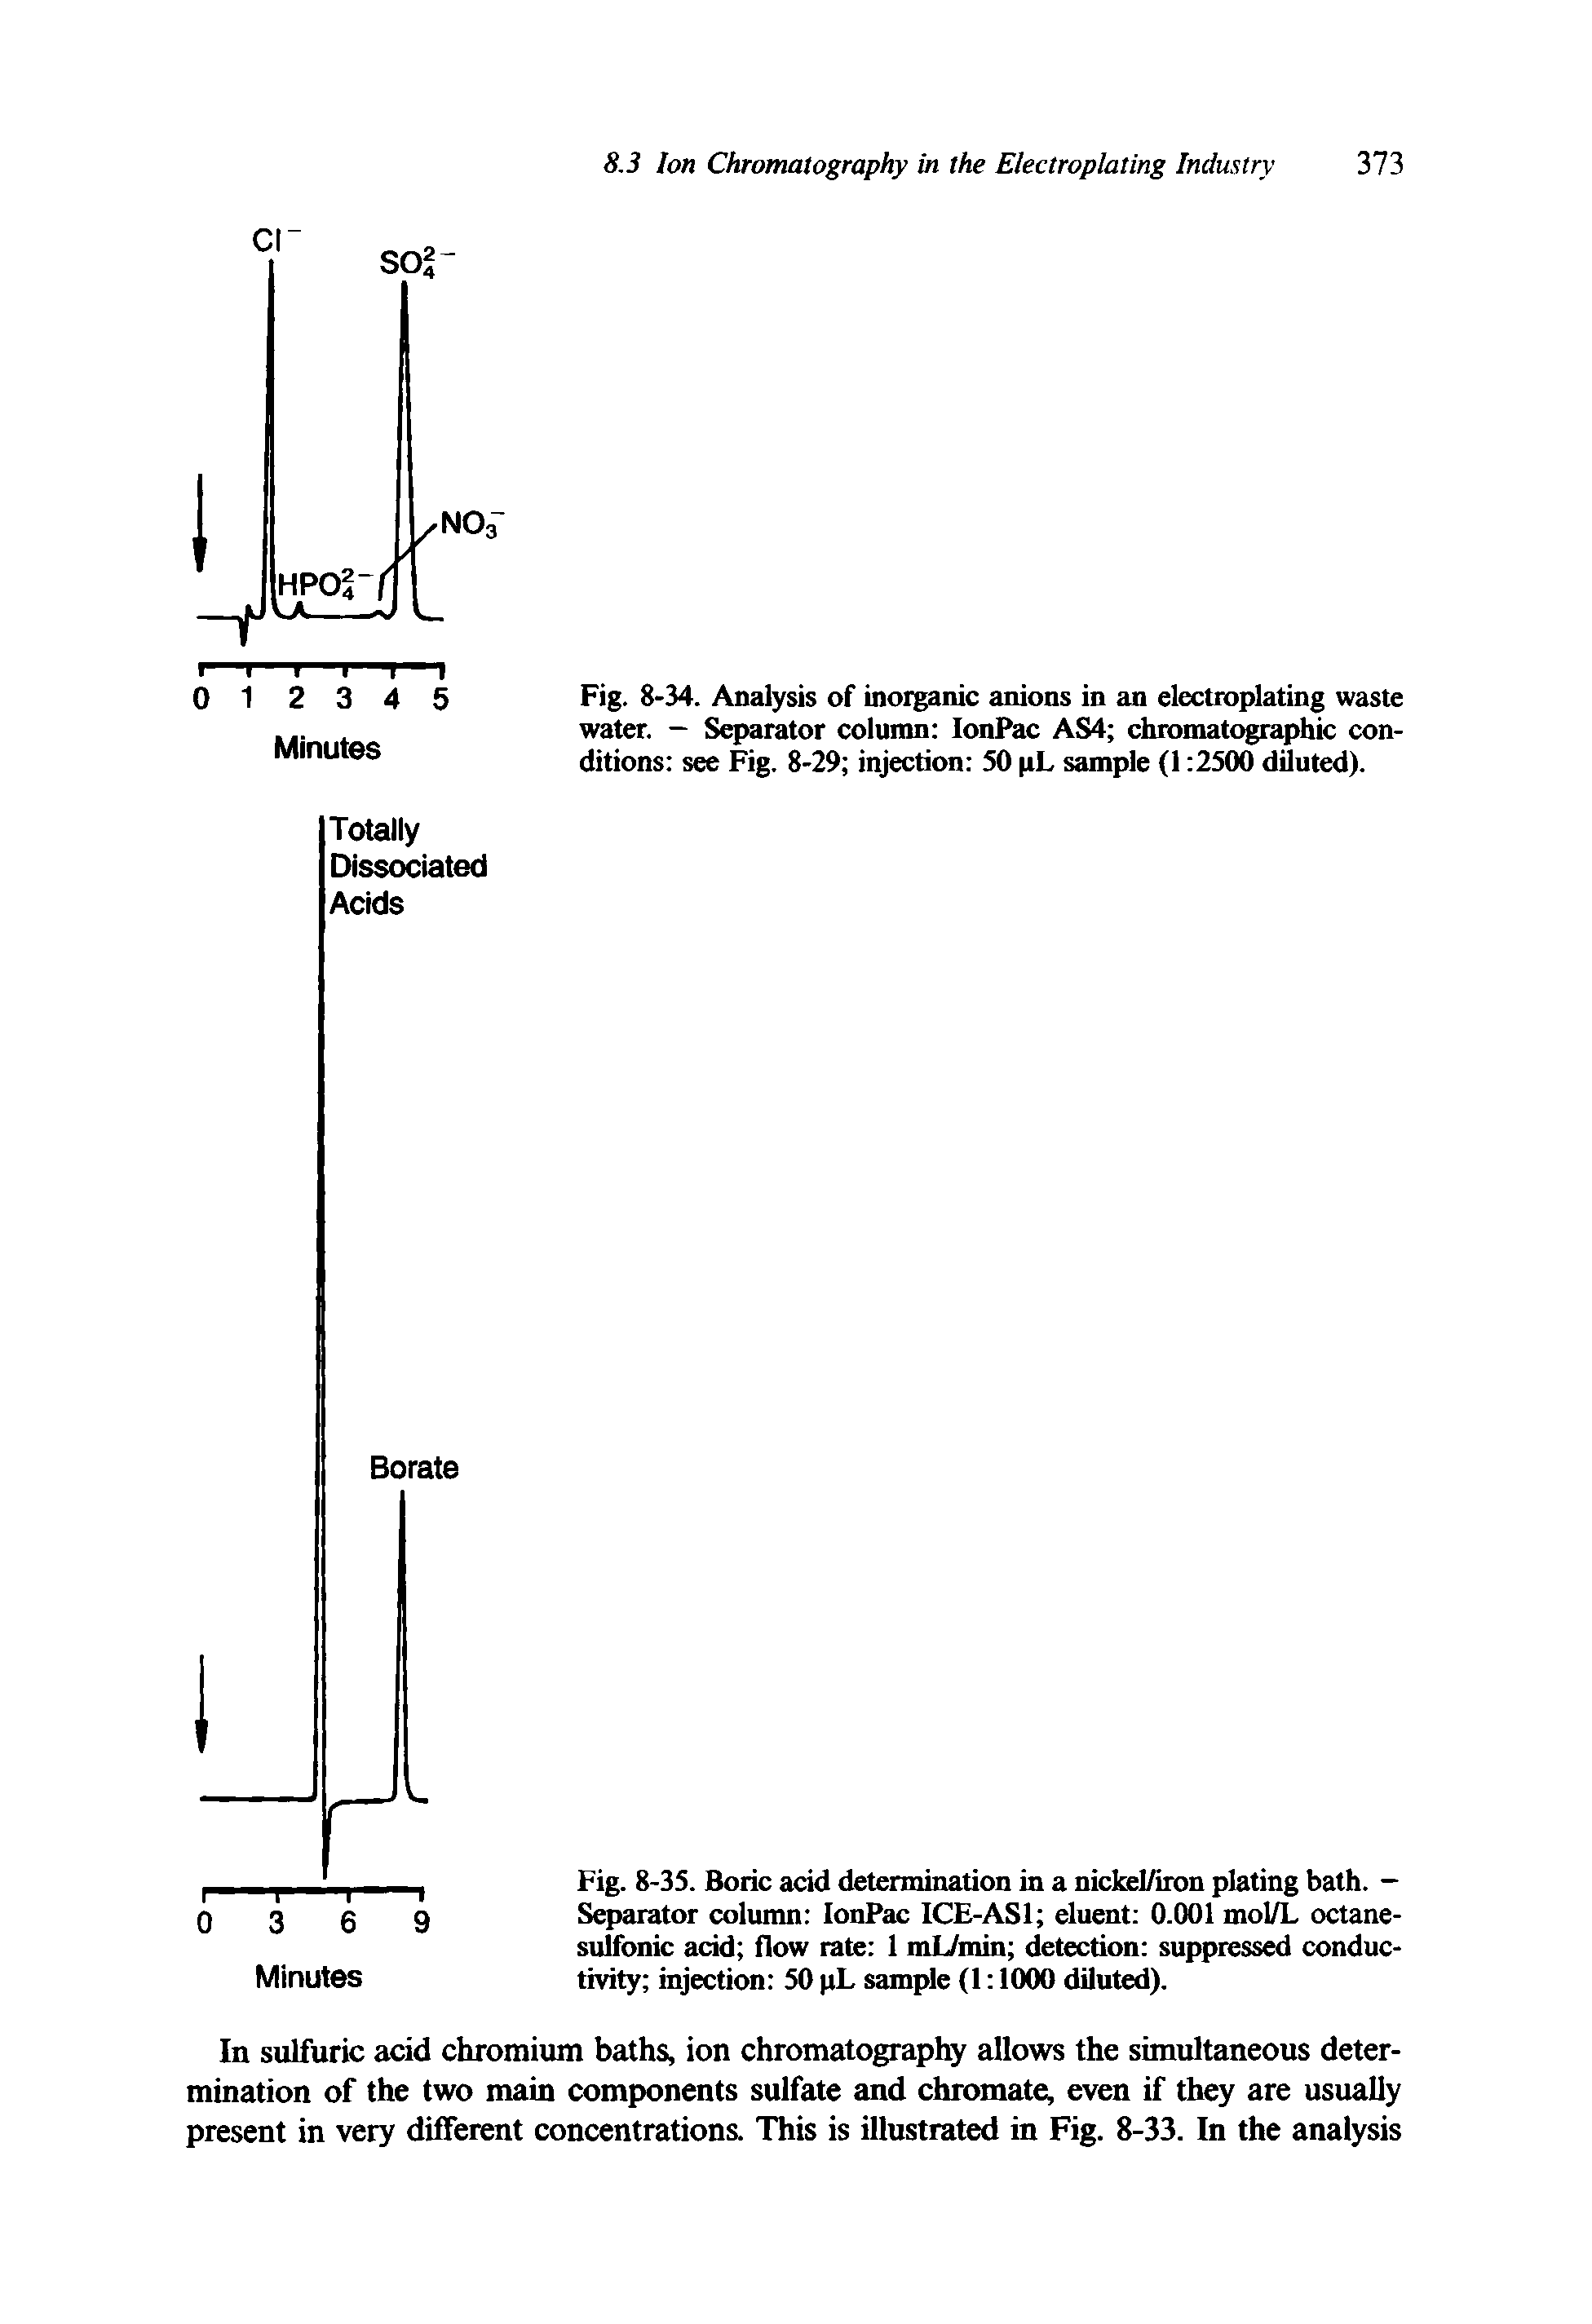 Fig. 8-35. Boric acid determination in a nickel/iron plating bath. — Separator column IonPac ICE-AS1 eluent 0.001 mol/L octane-sulfonic acid flow rate 1 mL/min detection suppressed conductivity injection 50 pL sample (1 1000 diluted).